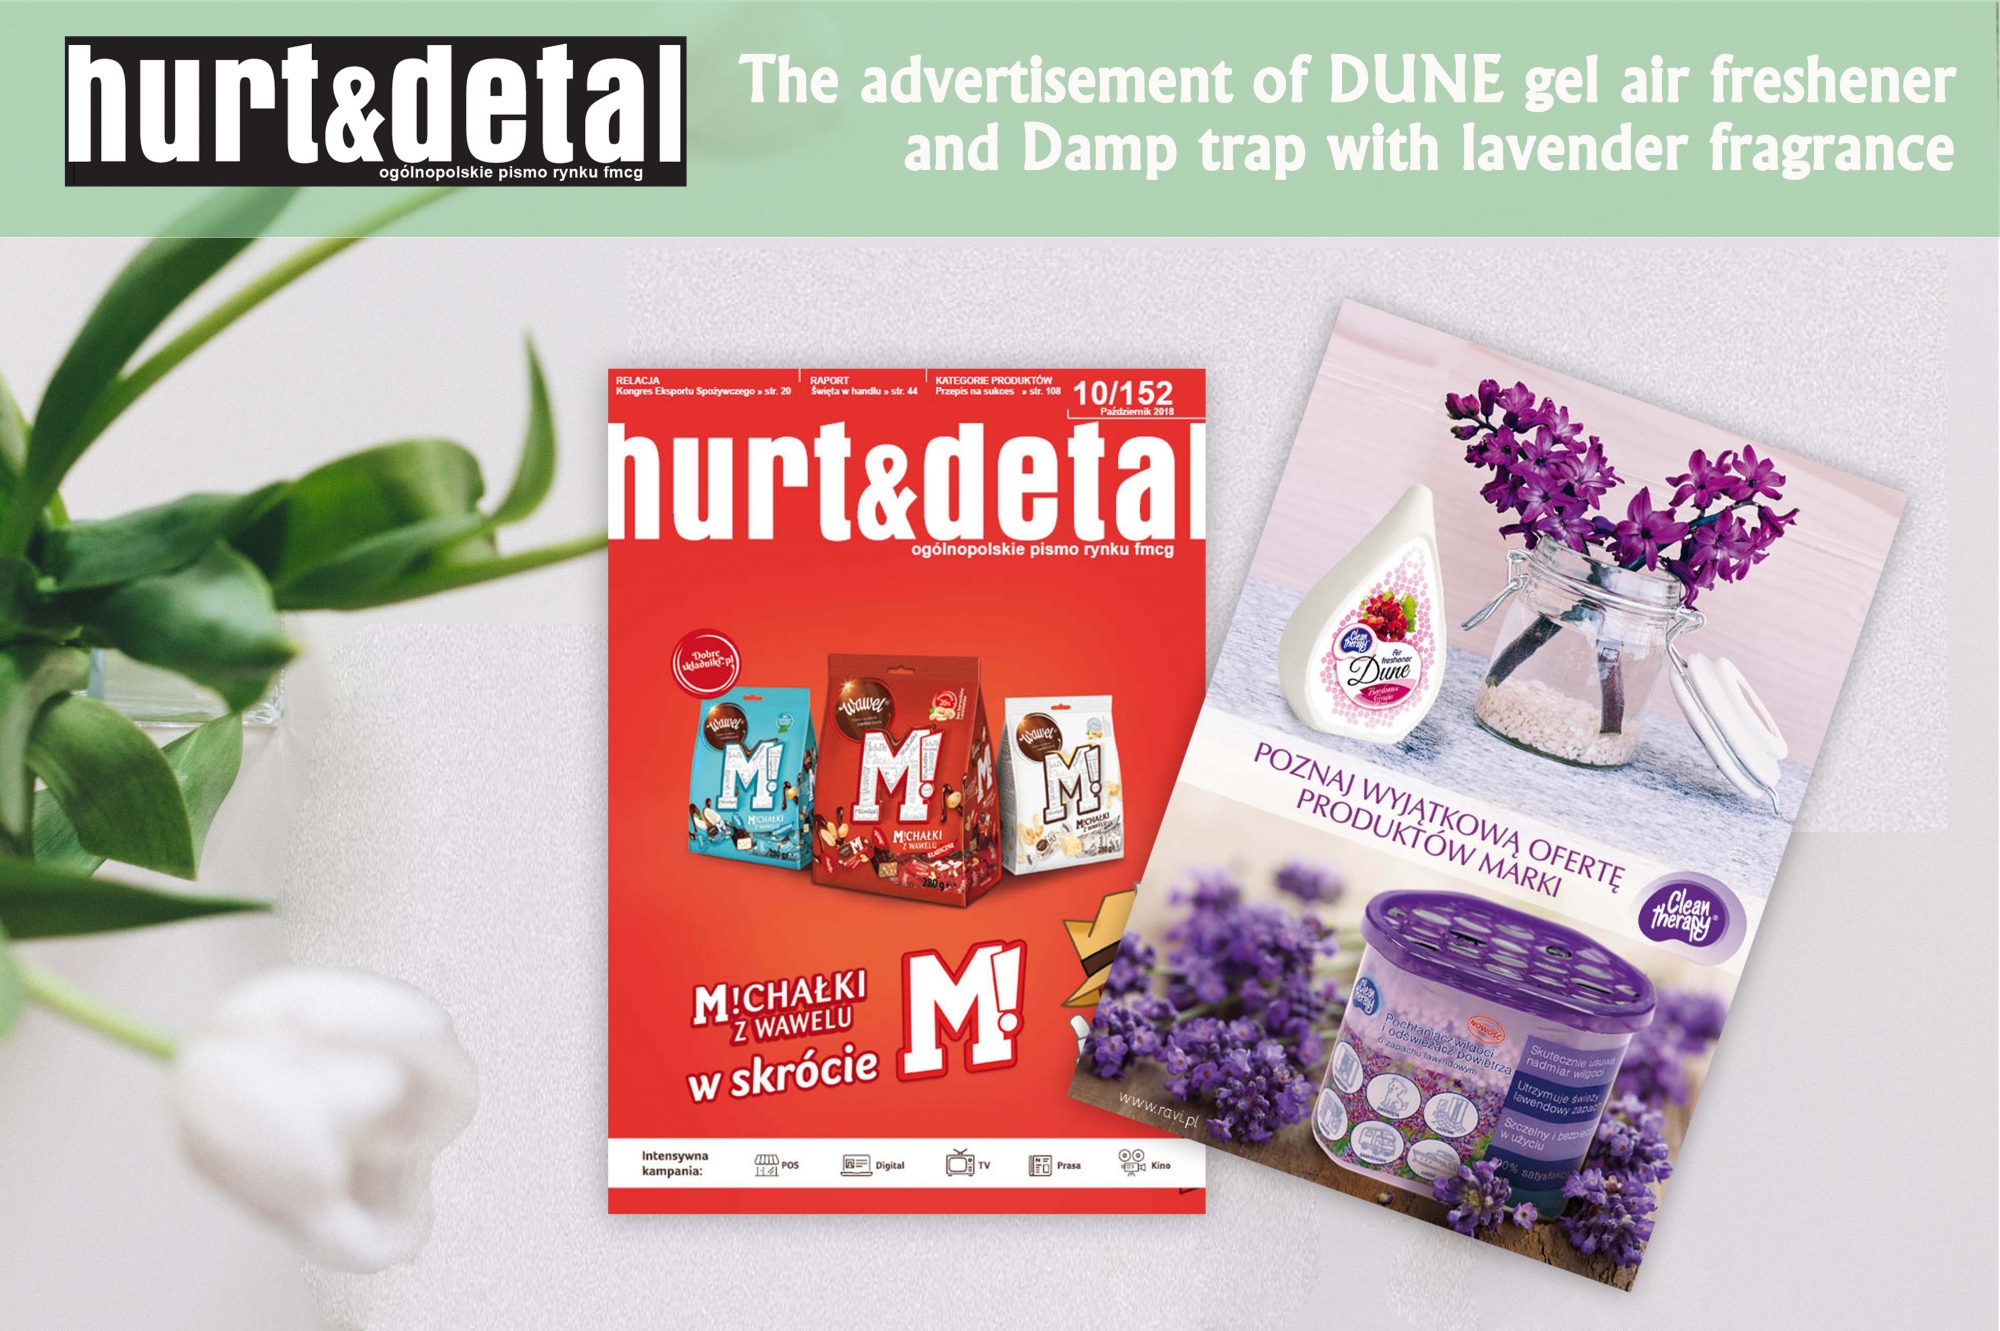 The ad of DUNE gel air freshener and Damp trap with lavender fragrance